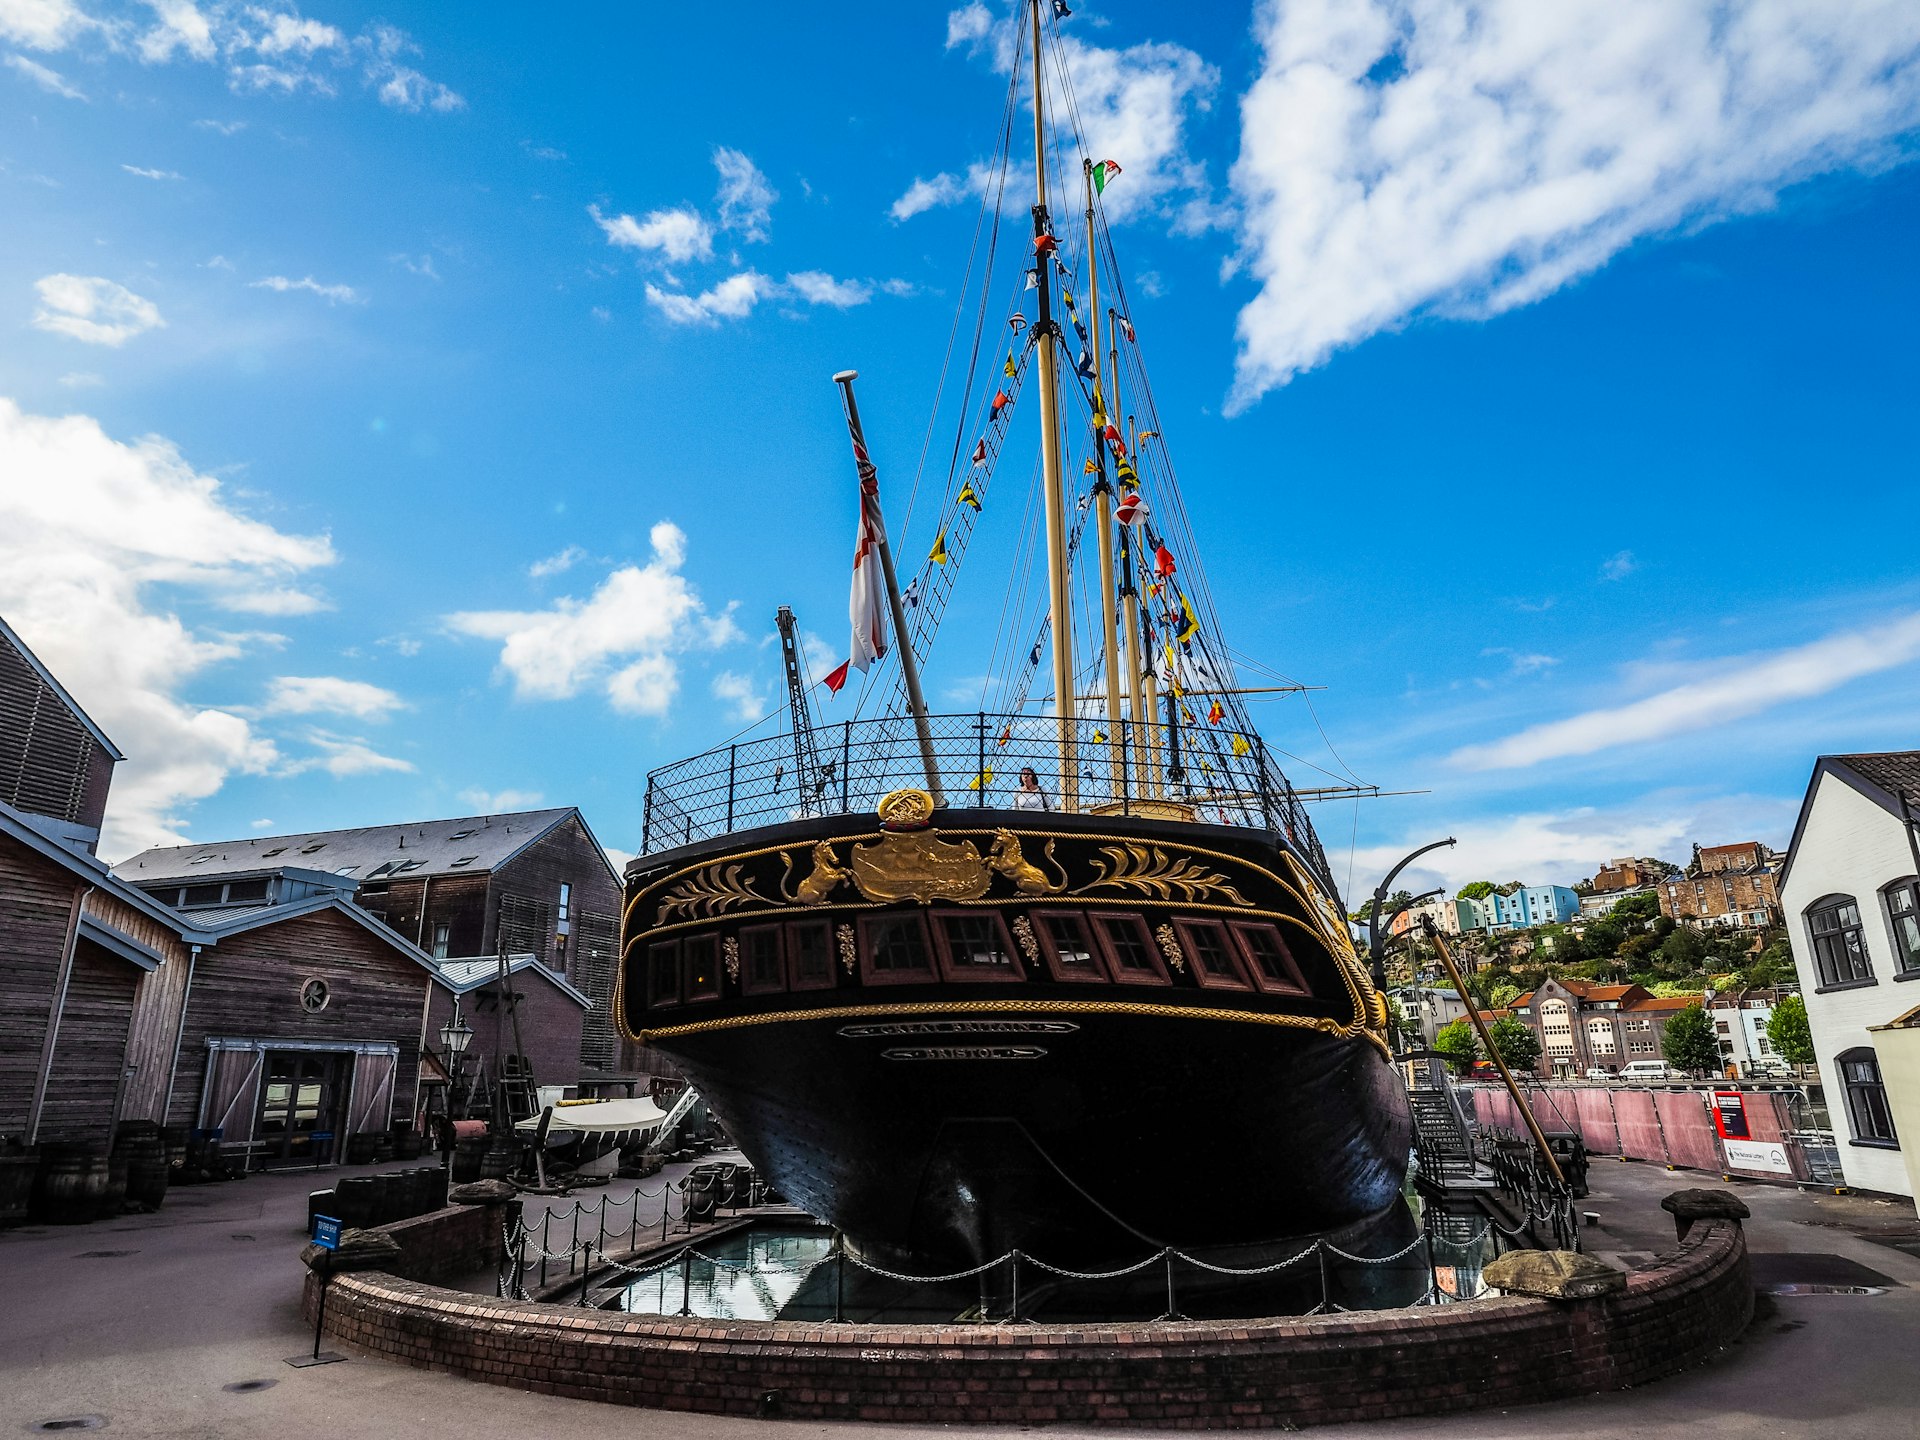 The stern of the SS Great Britain, a historic ship open to tourists in Bristol, England